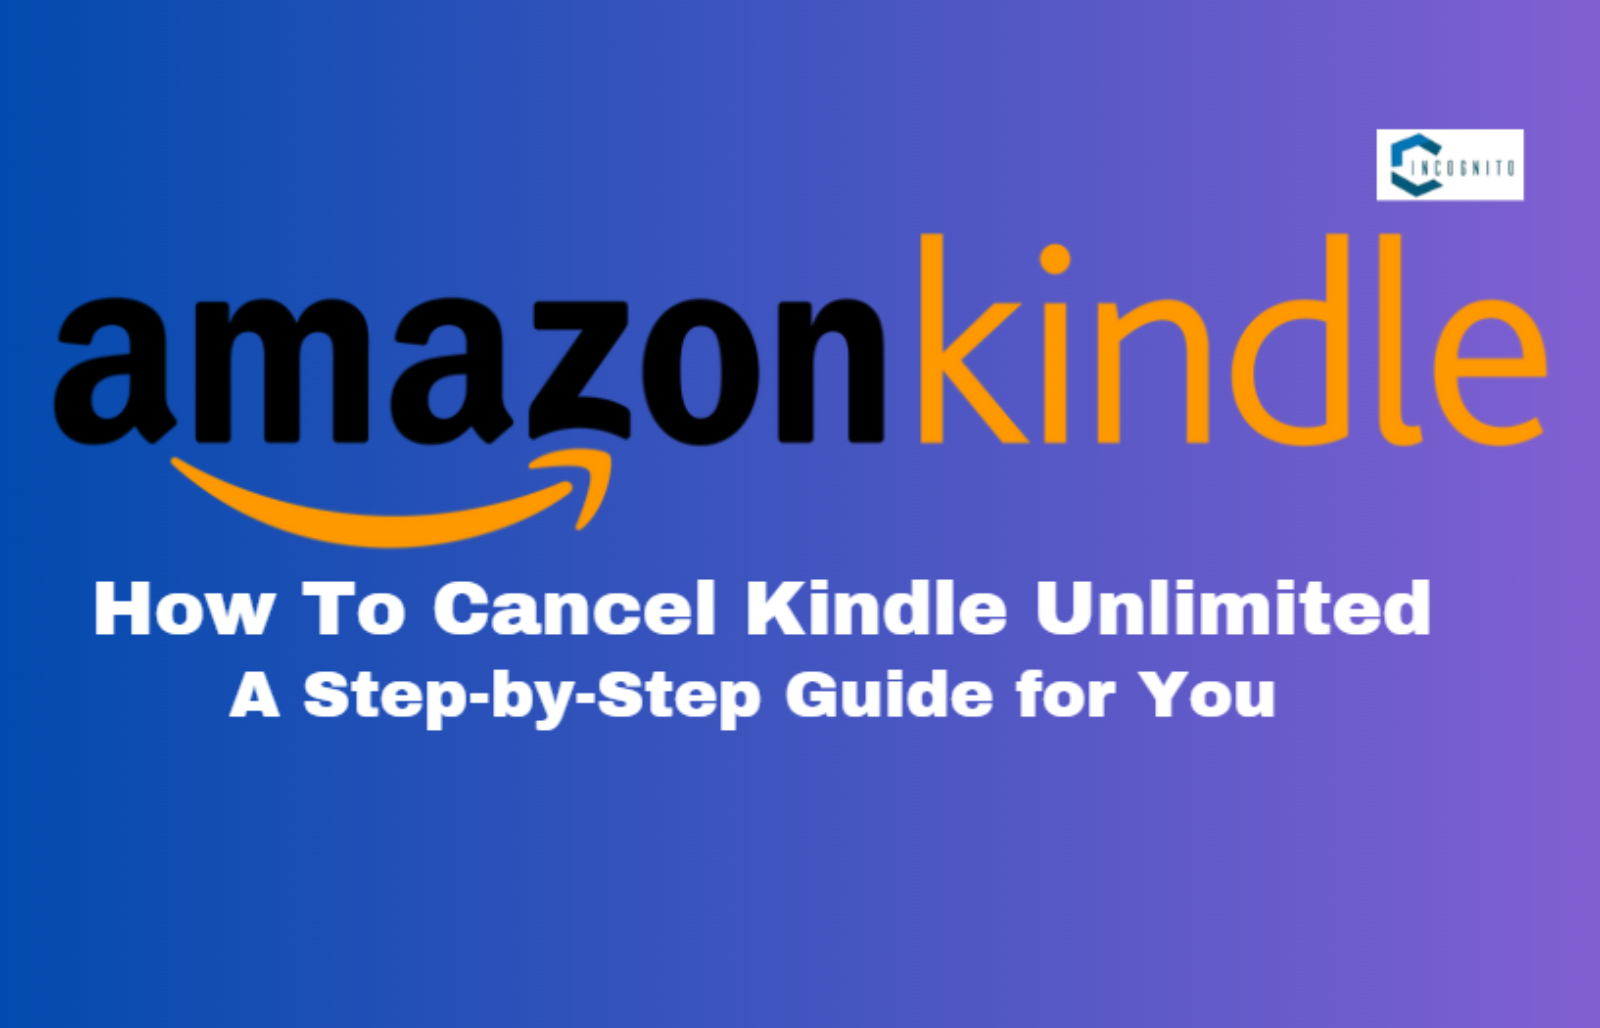 How To Cancel Kindle Unlimited: A Step-by-Step Guide for You